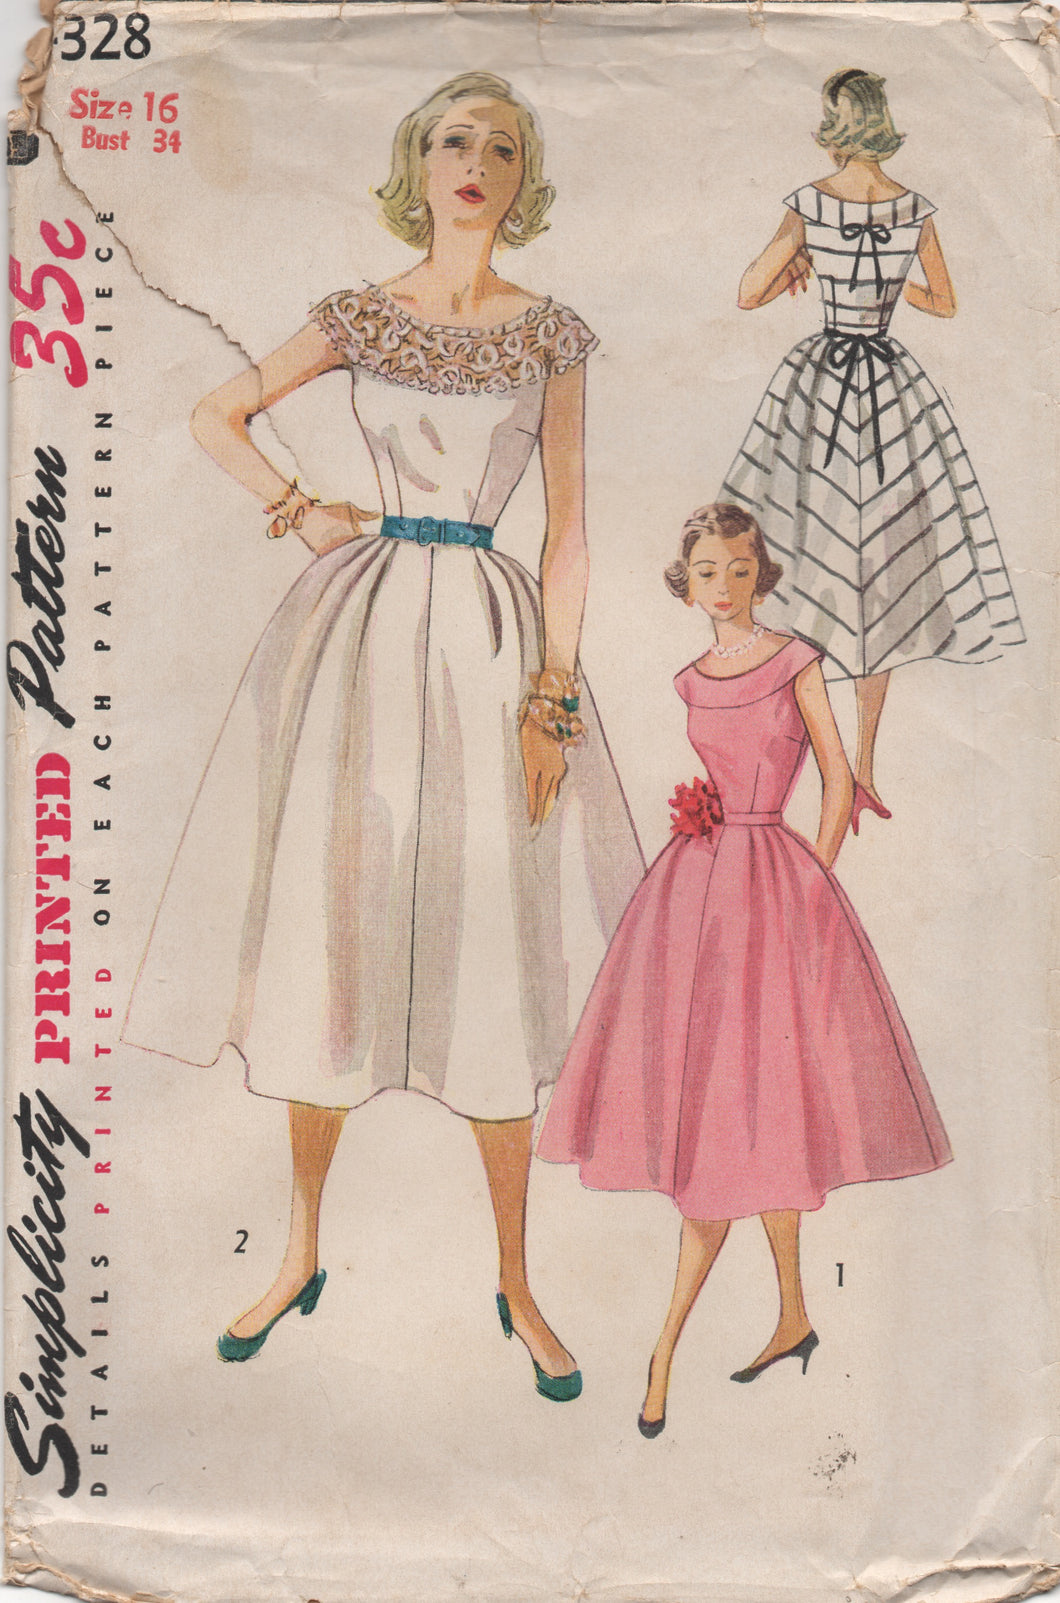 1950's Simplicity One Piece Dress with Boat Neck - Bust 34